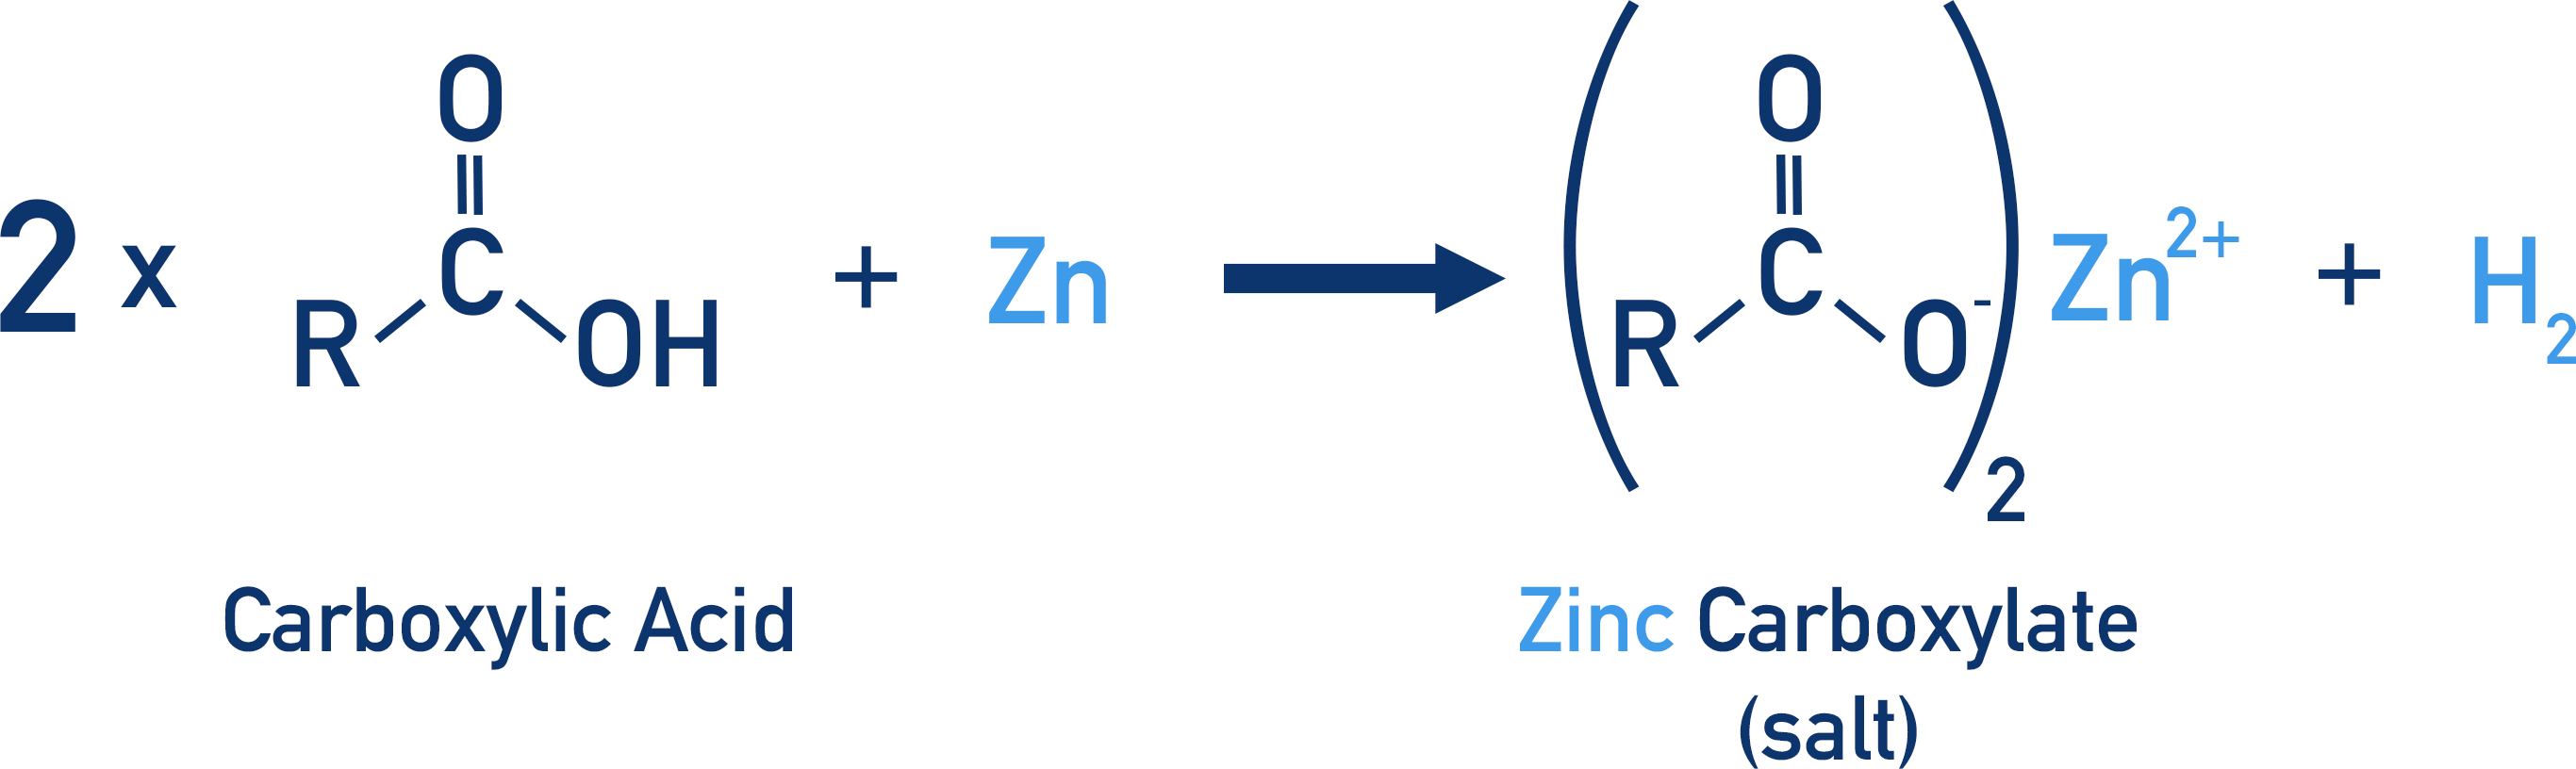 carboxylic acid with zinc to form salt zinc carboxylate and hydrogen gas